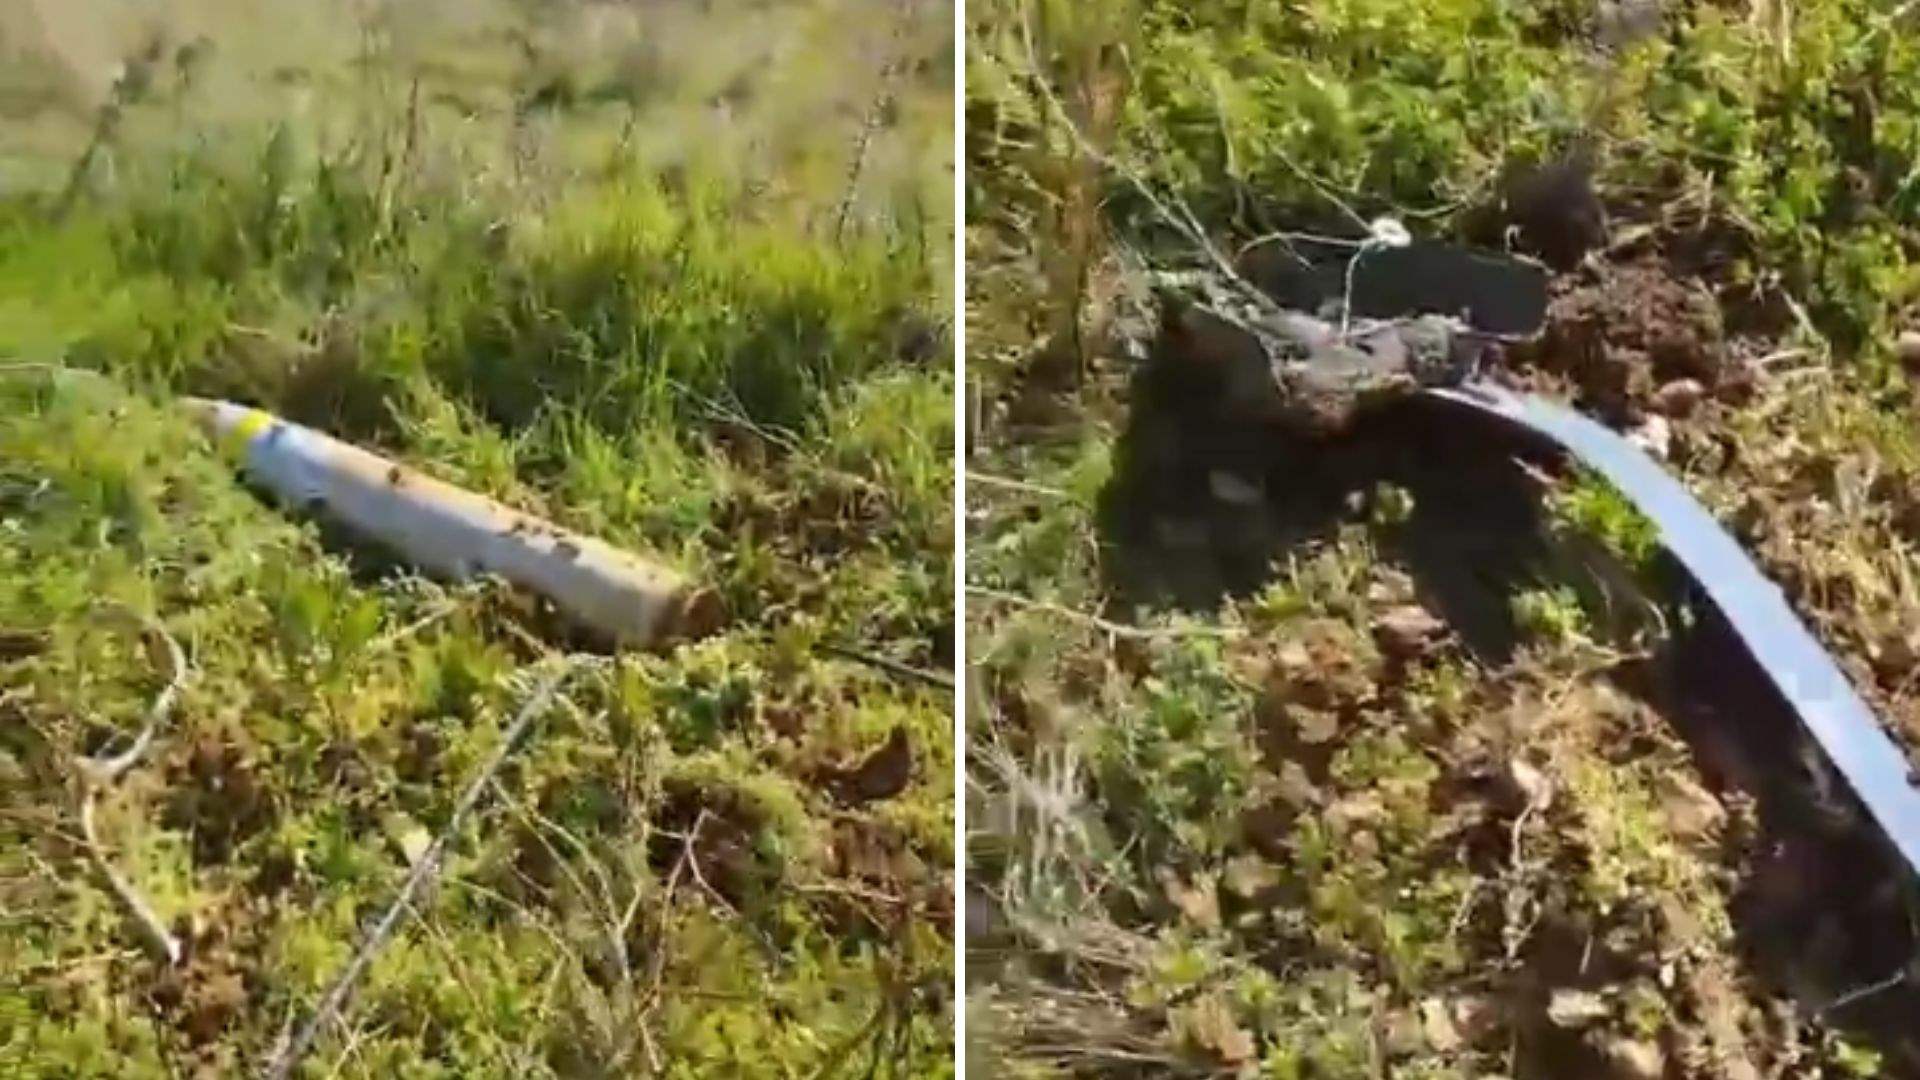 Army Command: Specialized unit examining unexploded rocket found in Hrajel